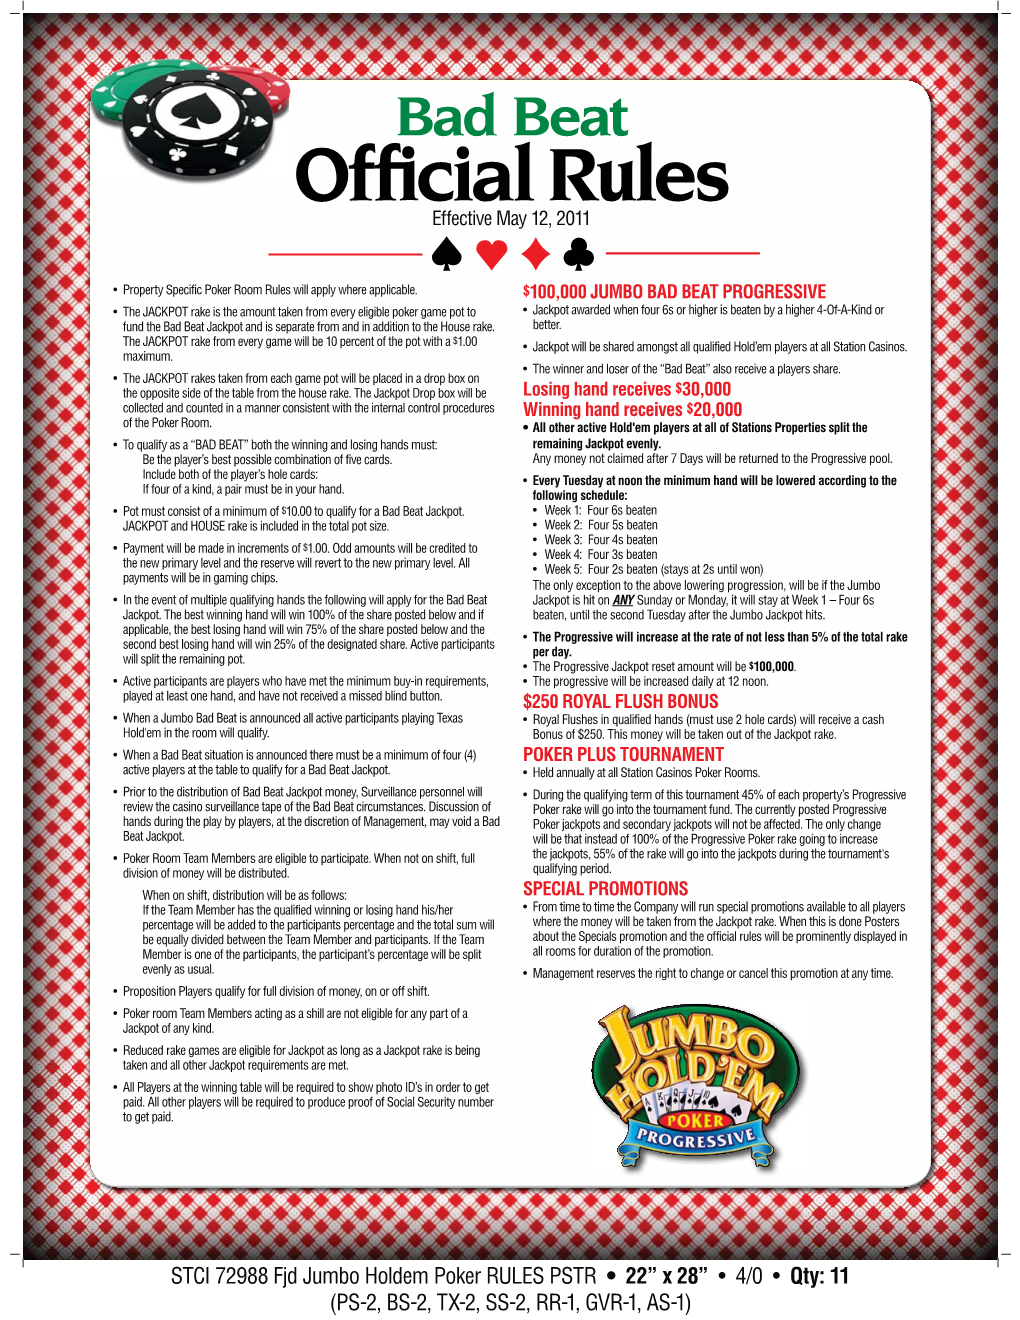 Official Rules Effective May 12, 2011